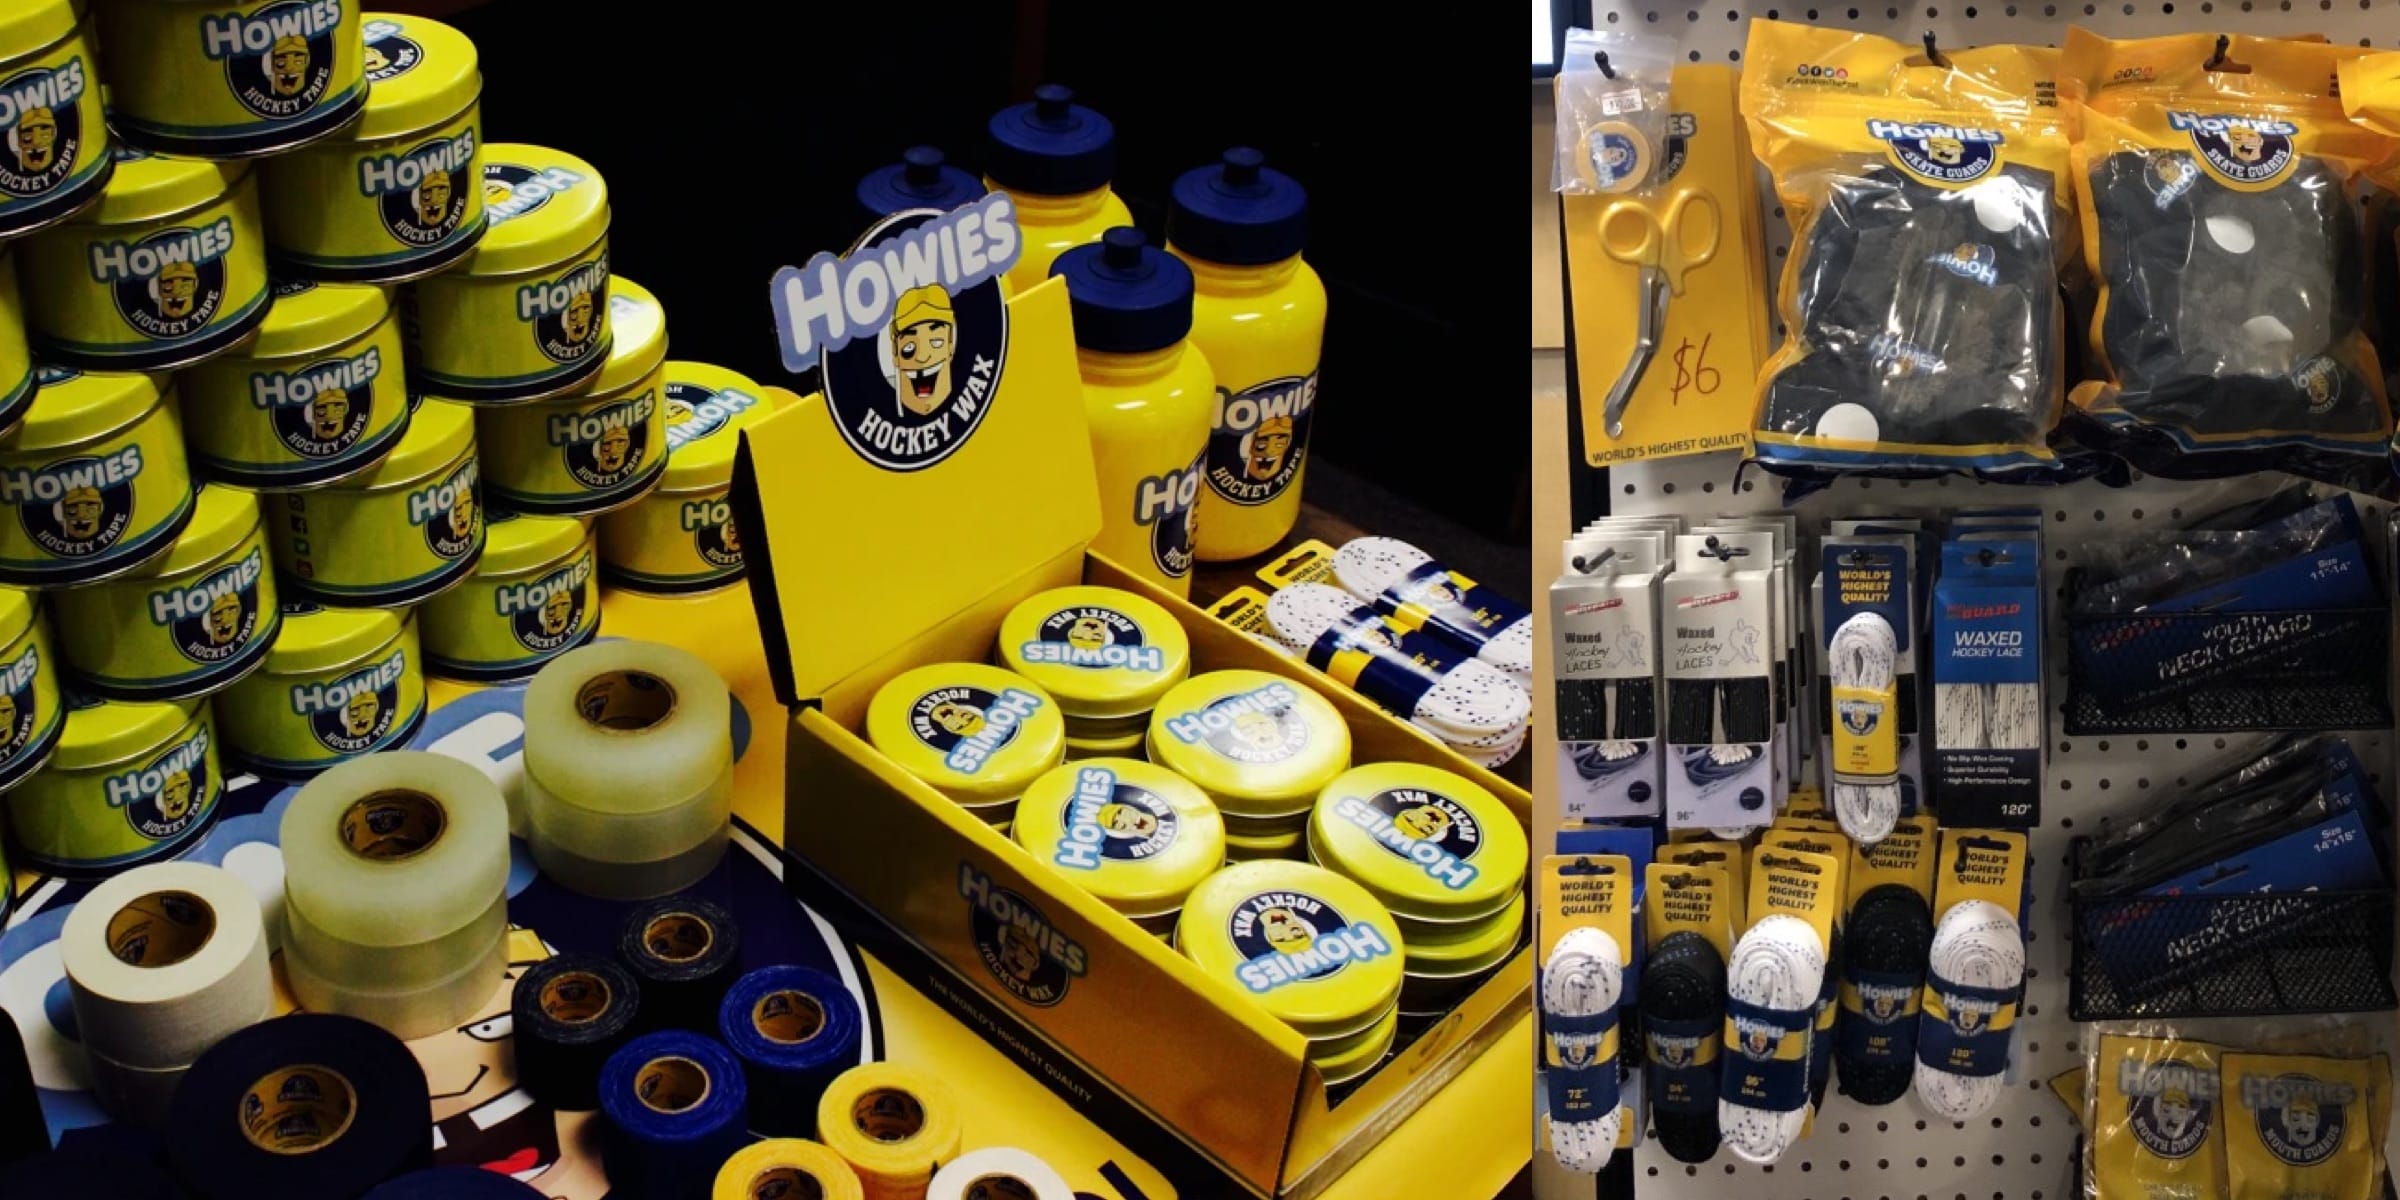 an image of products in the Pro Shop